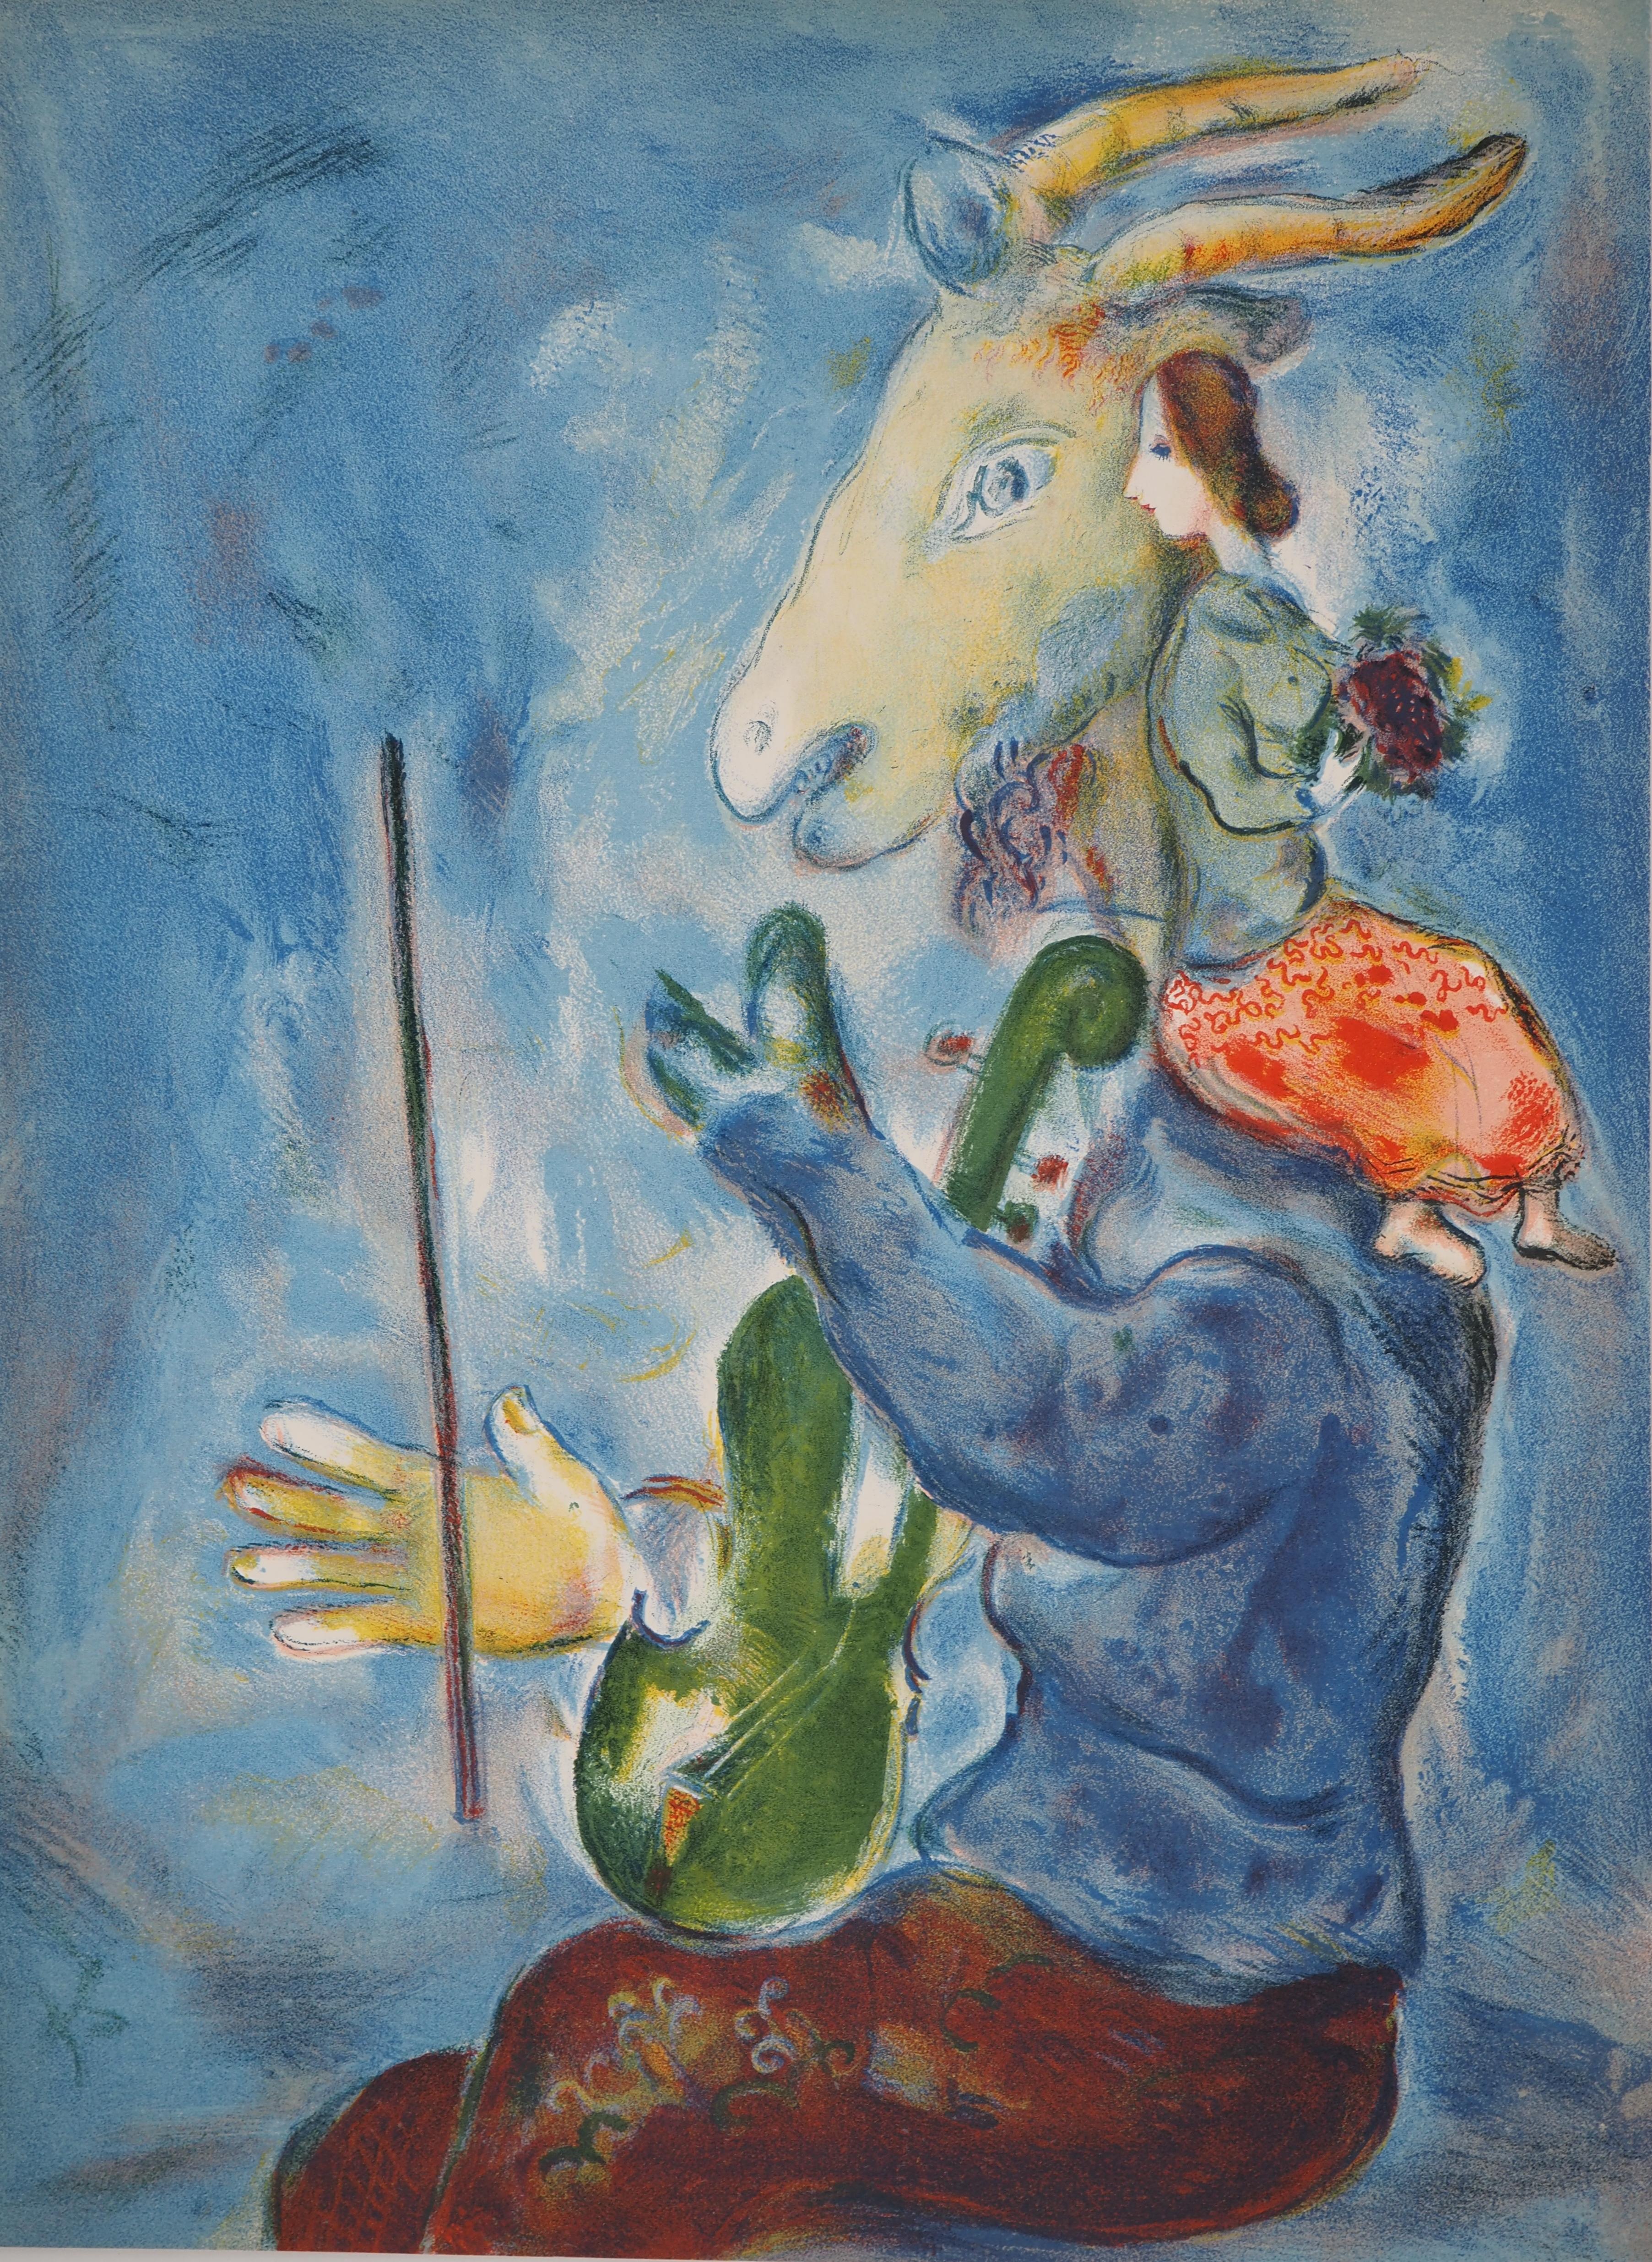 What is Marc Chagall most known for?